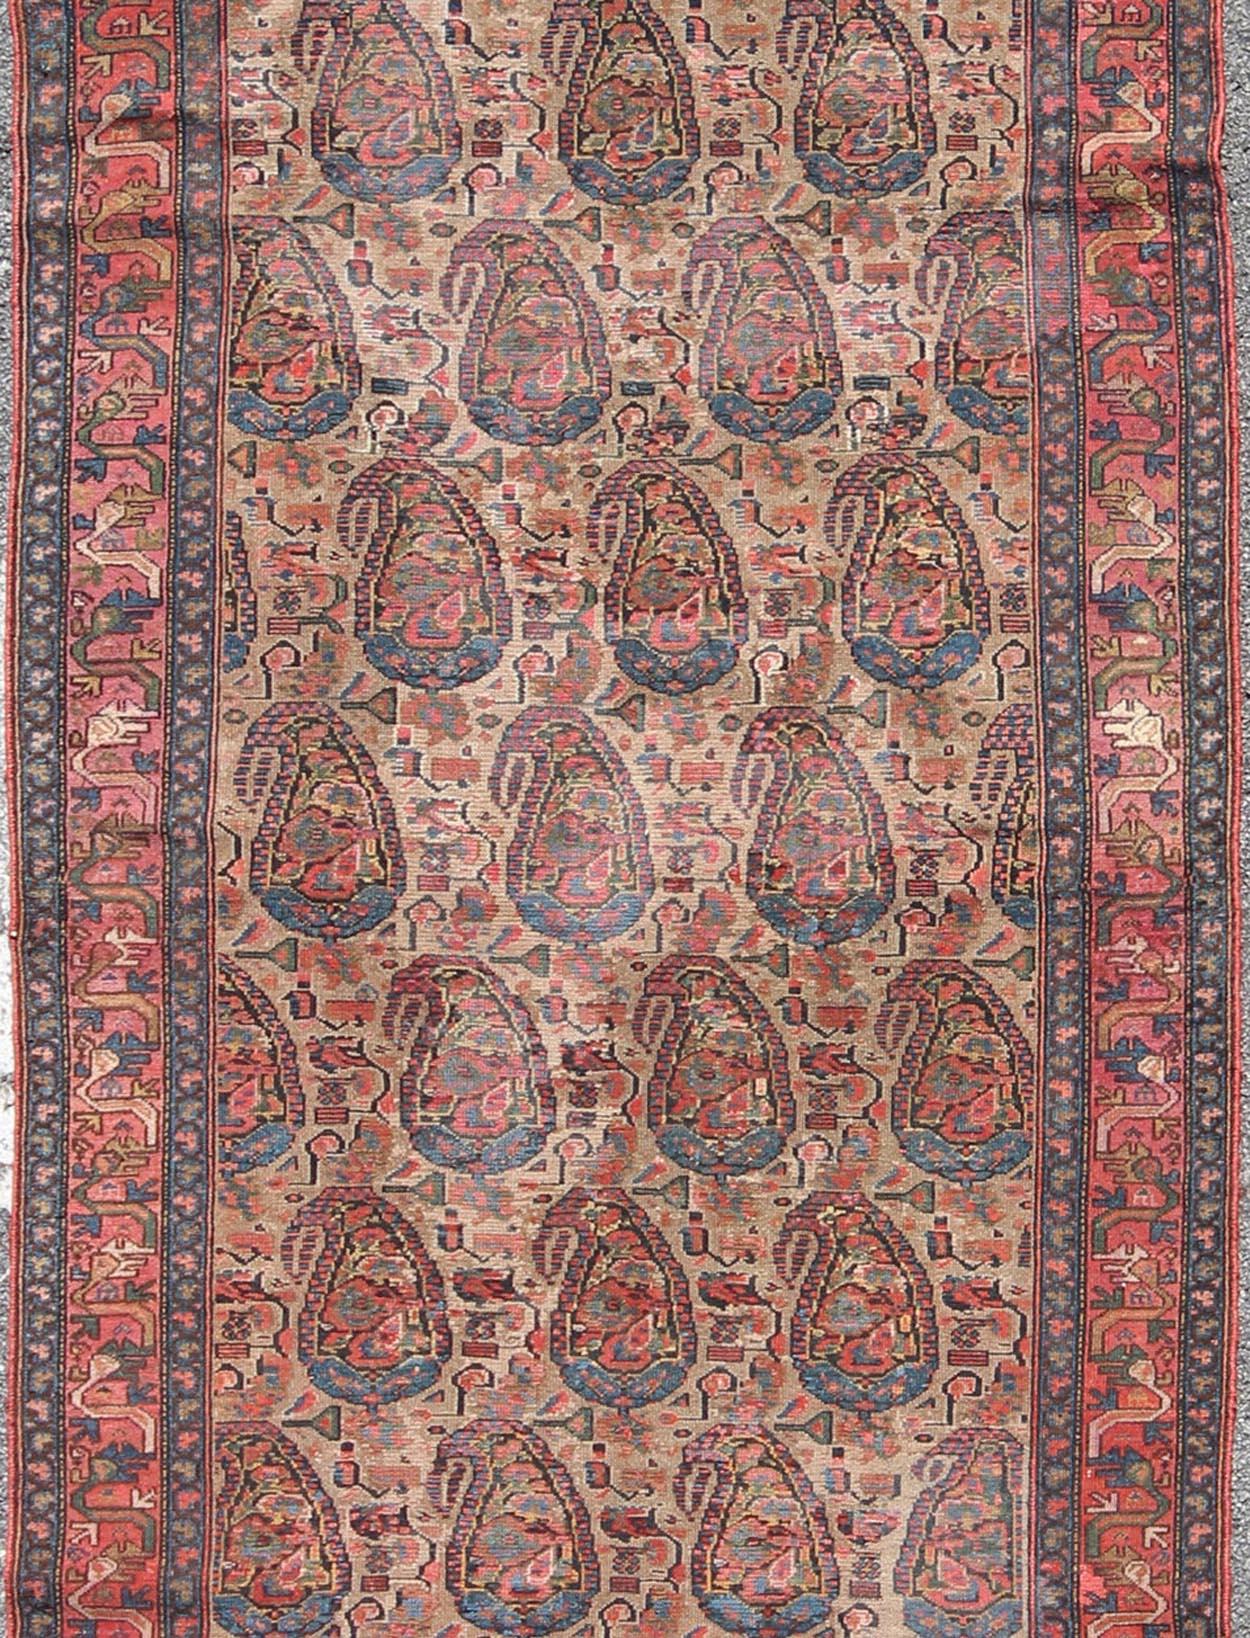 Measures 4'0 x 9'2

The richly intricate design of this handwoven, antique Seneh Malayer rug distinguishes it from all others of its kind. The iconic all-over design consists of paisley surrounded by curving leaves. A blend of Persian inspiration